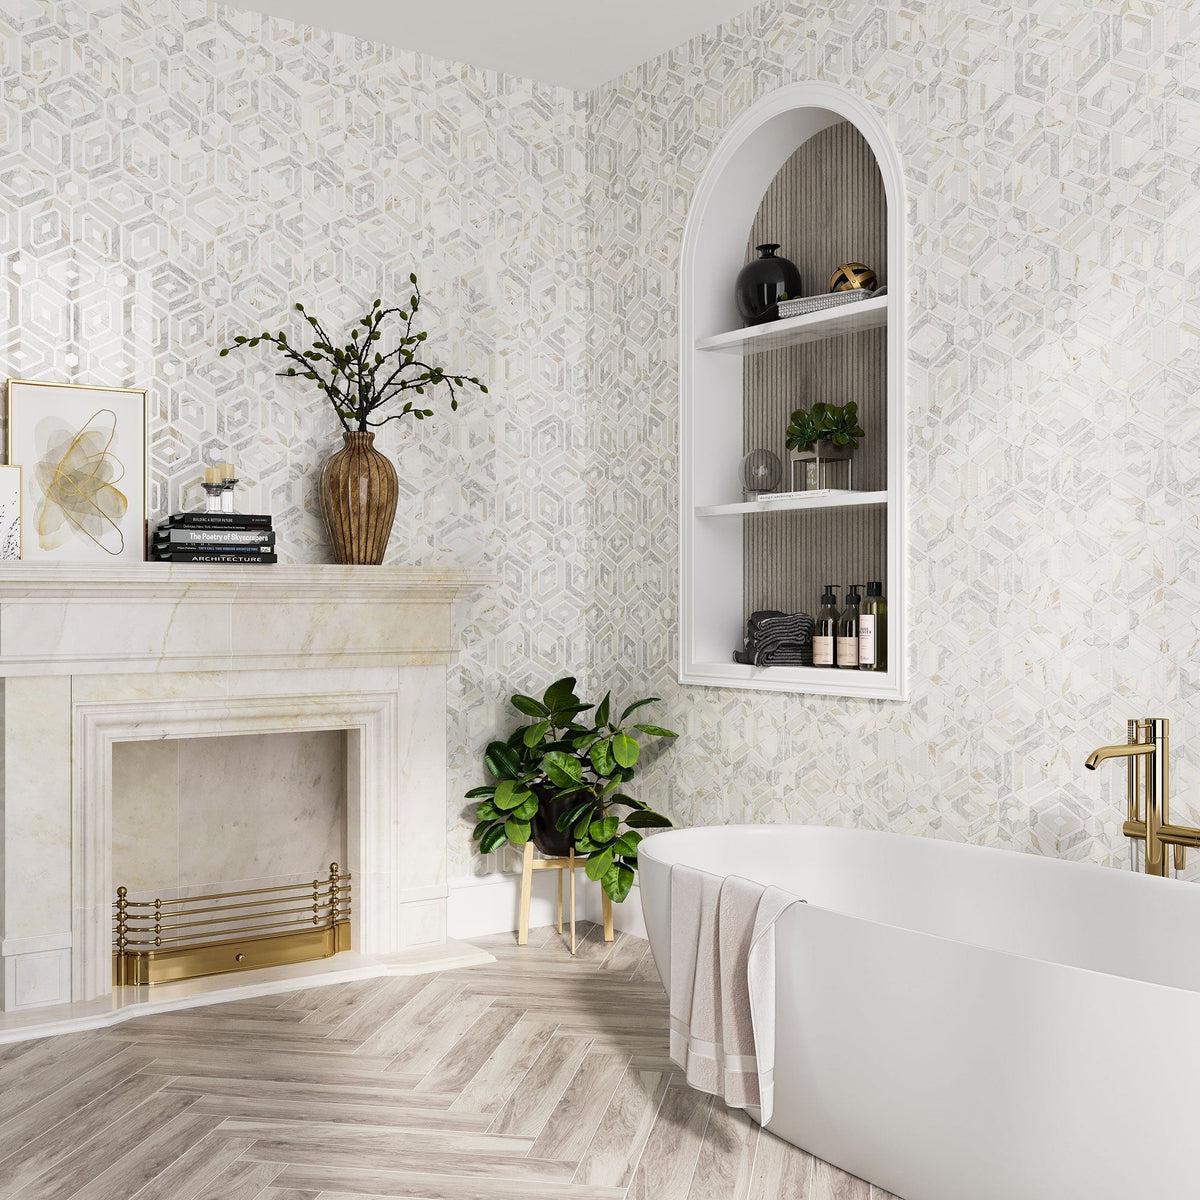 Glamorous bathroom wall tile with soaking tub and fireplace